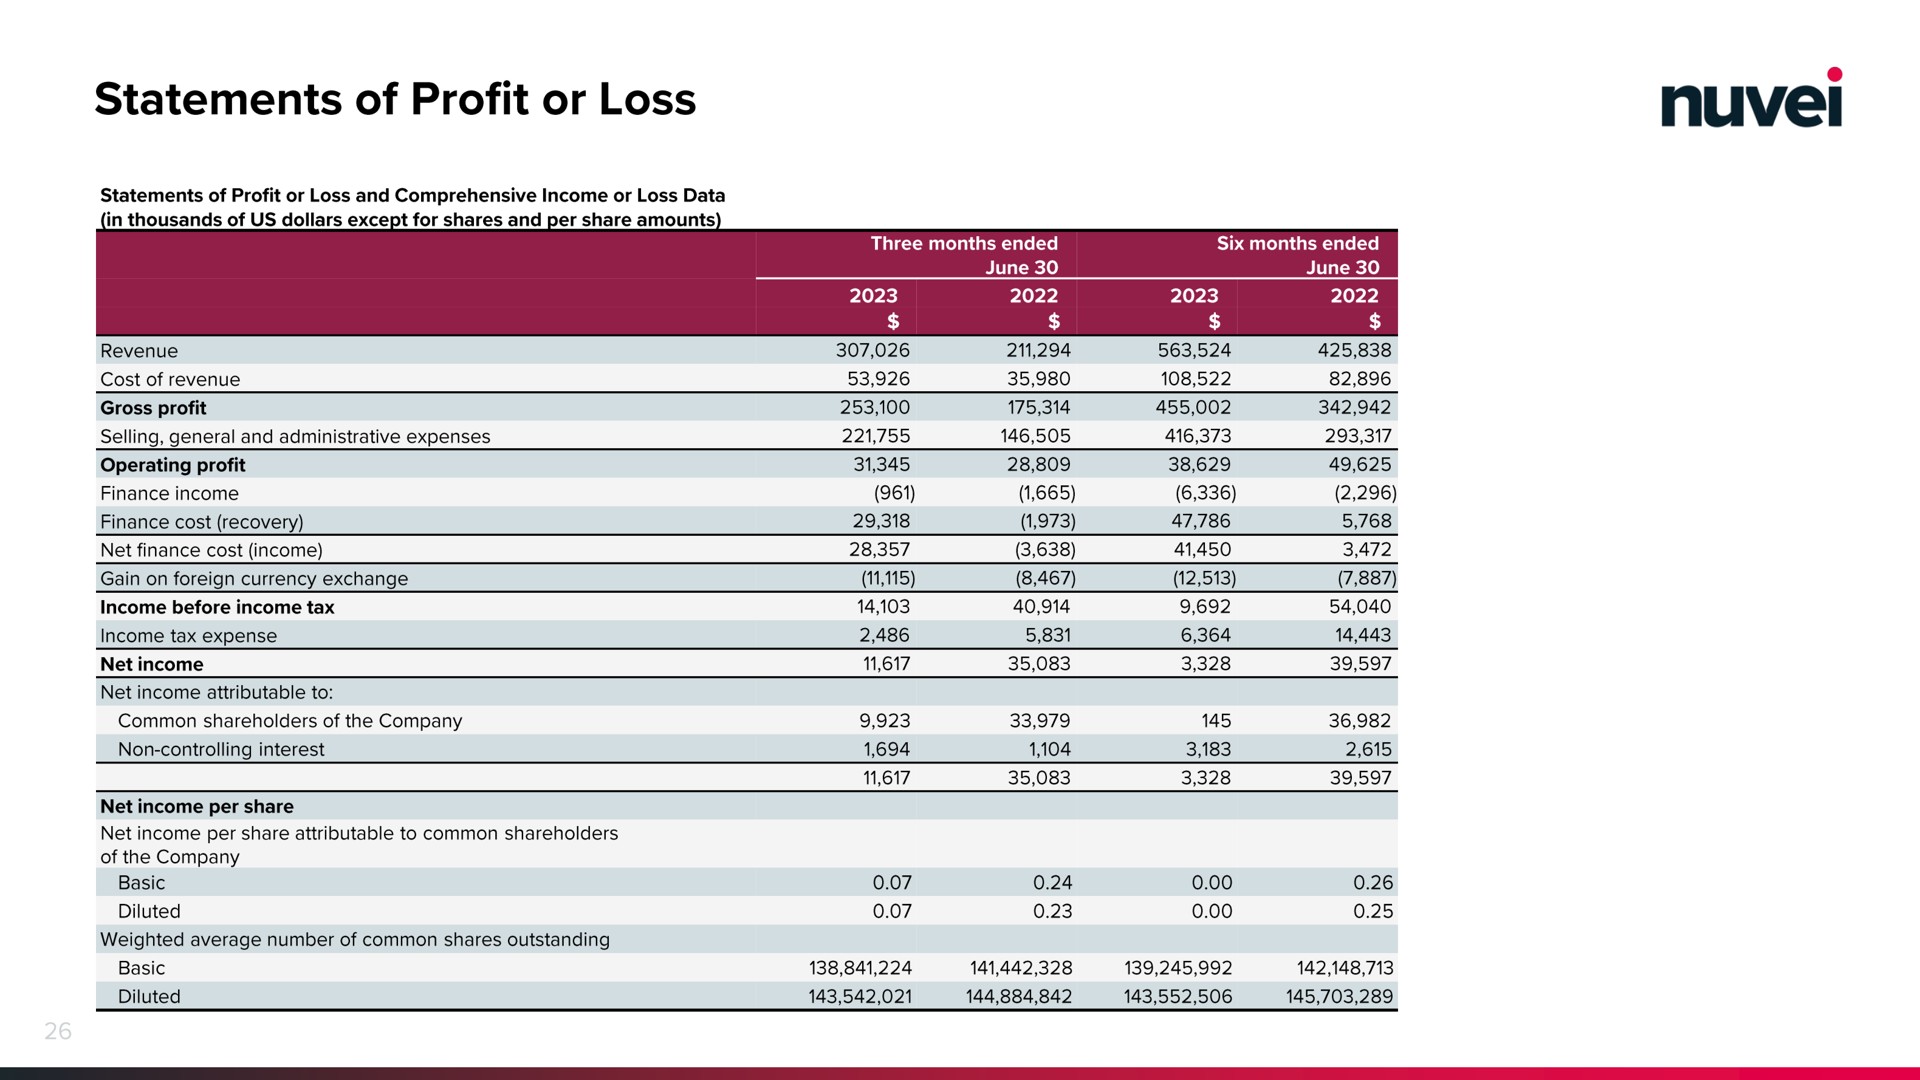 statements of profit or loss | Nuvei